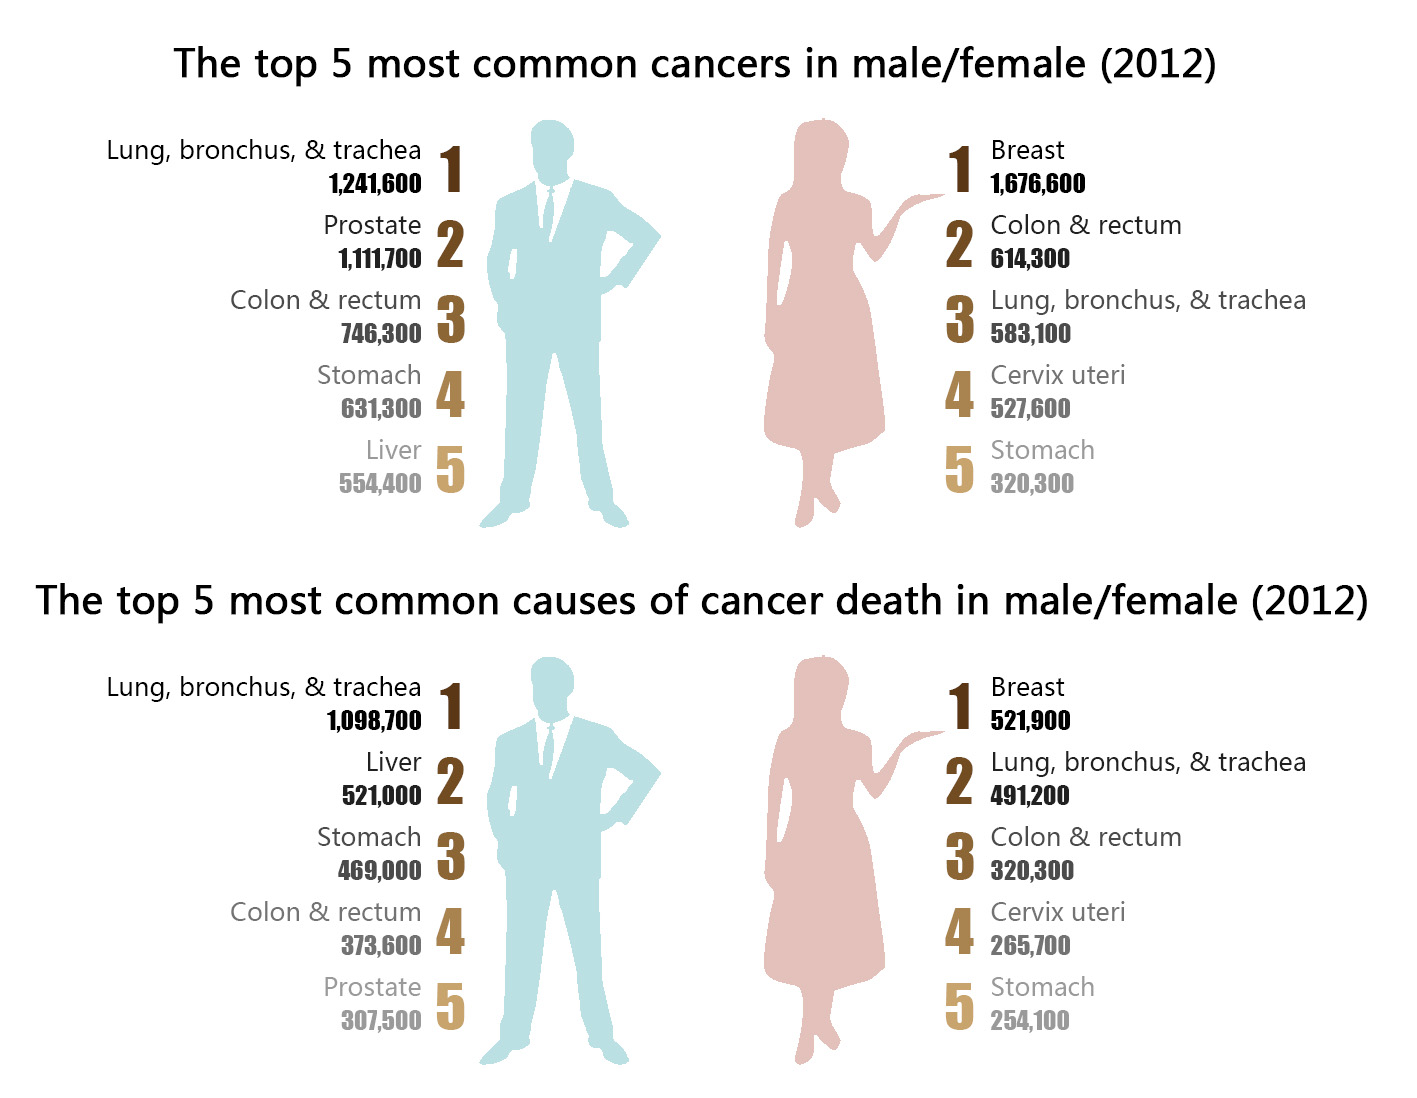 Is cancer more common in males or females?